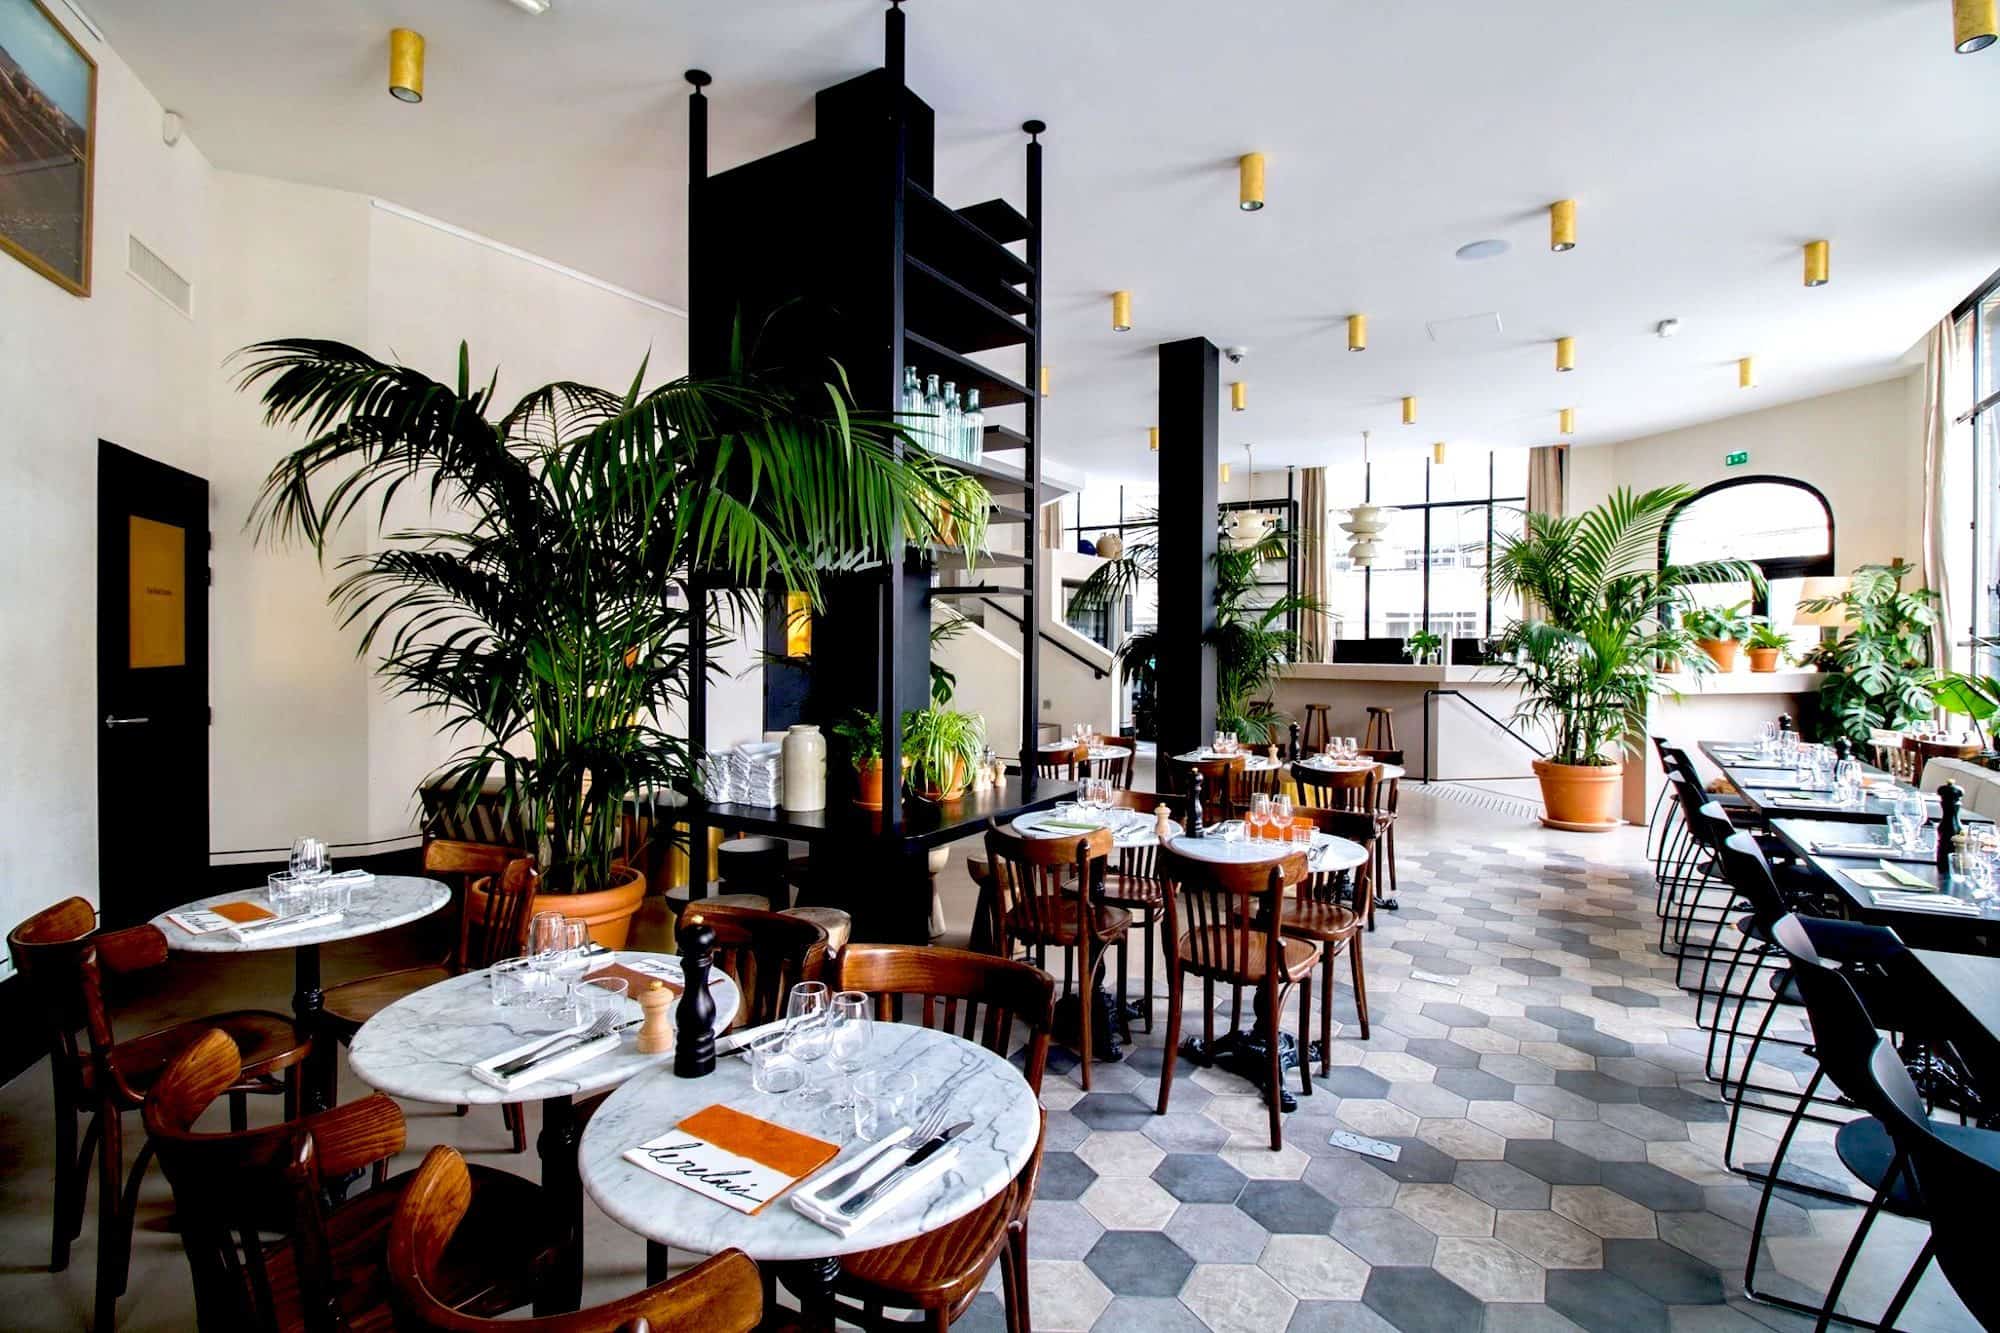 The main dining space at Le Relais restaurant in Paris, a light and bright space with potted plants and tiled floors.